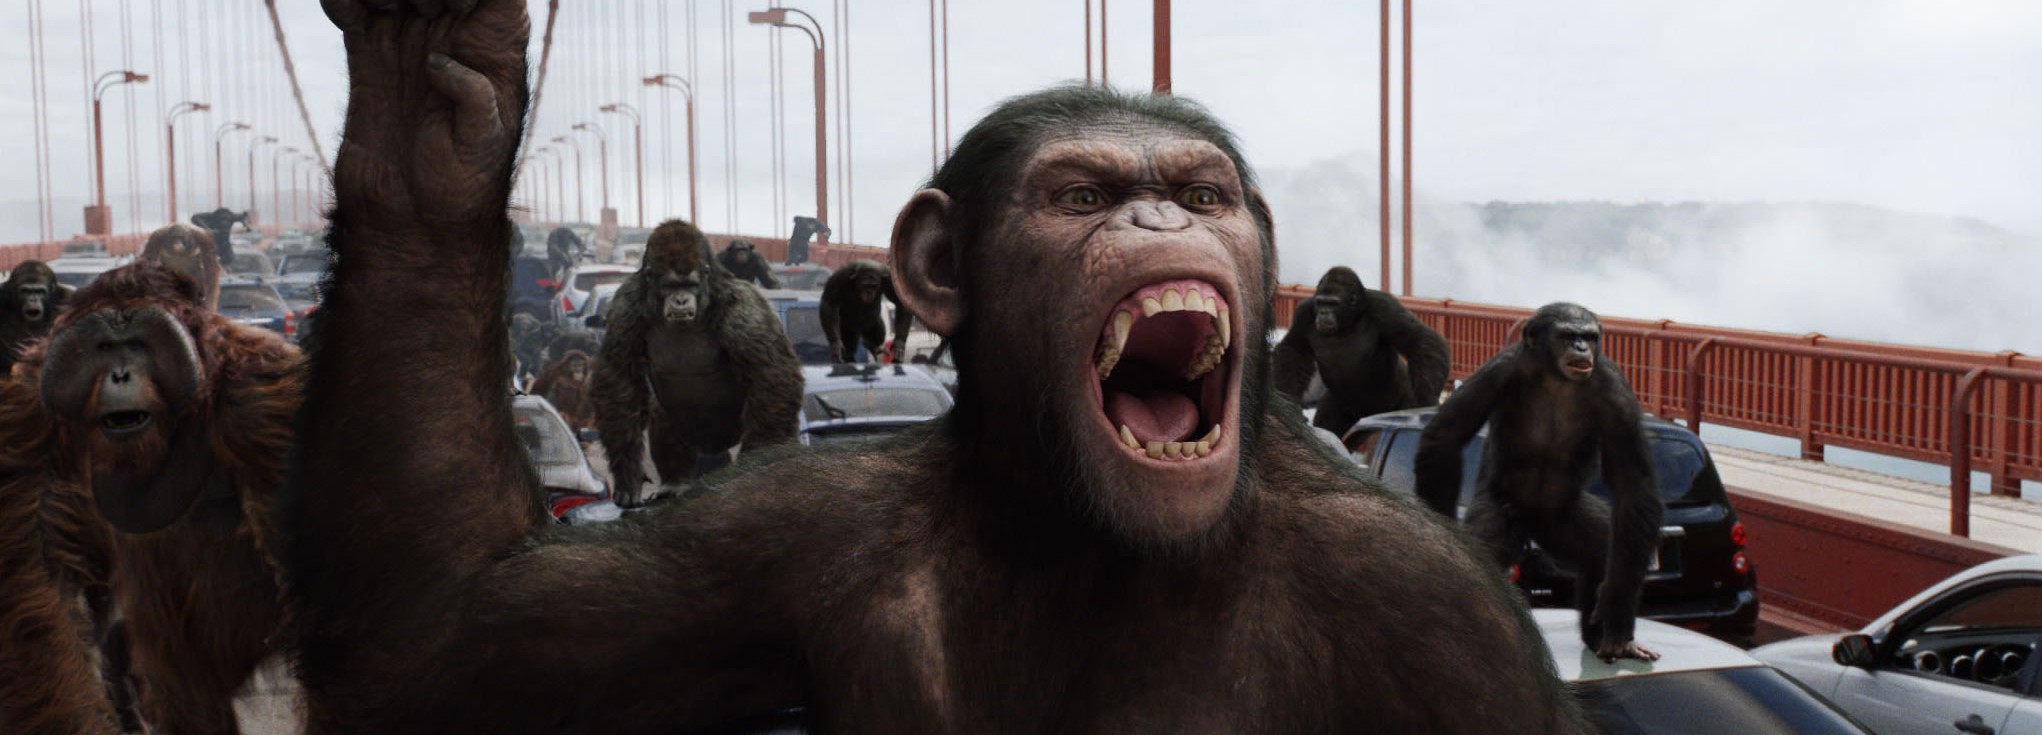 Recensie: Rise of the Planet of the Apes